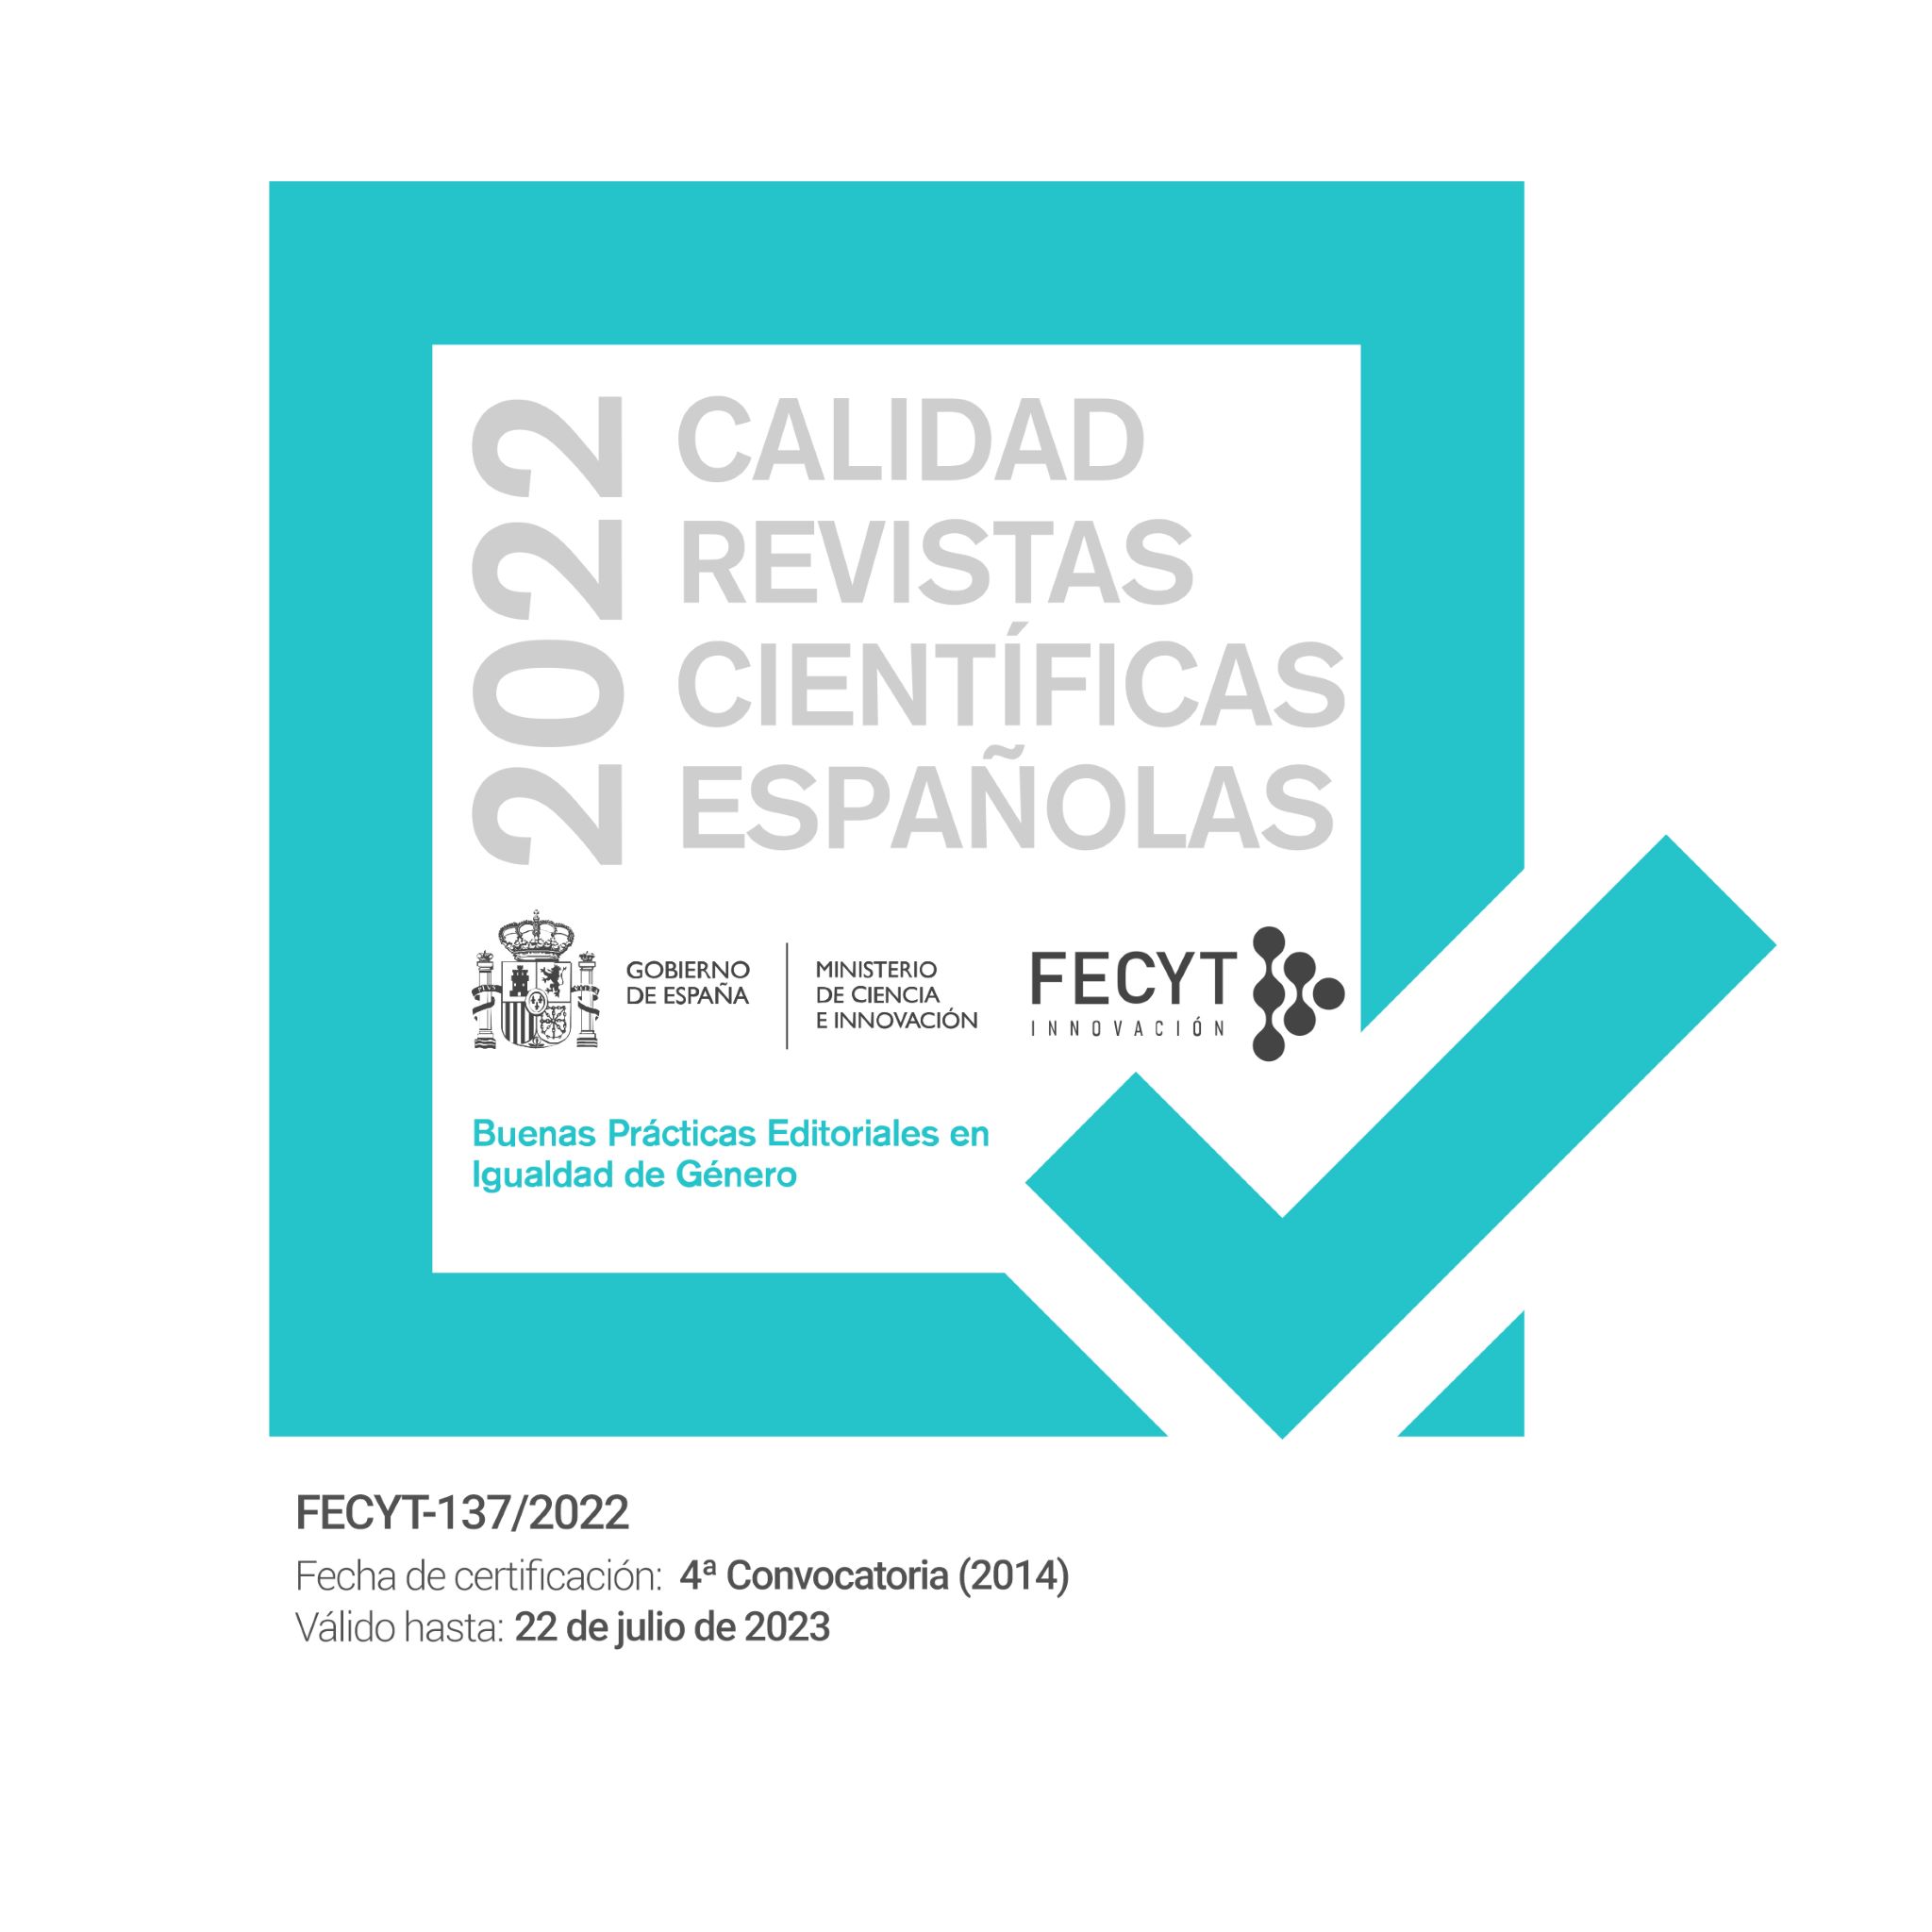 The Spanish Foundation for Science and Technology (FECYT) has awarded Doxa Comunicación, certificate FECYT-137/2022, valid until 22 July 2023, with a mention of good editorial practices in gender equality; Categories: Communication, Information and Scientific Documentation. FECYT is a public foundation under the Ministry of Science and Innovation. It works to strengthen the link between science and society through actions that promote open and inclusive science, scientific culture and education, responding to the needs and challenges of the Spanish Science, Technology and Innovation System.